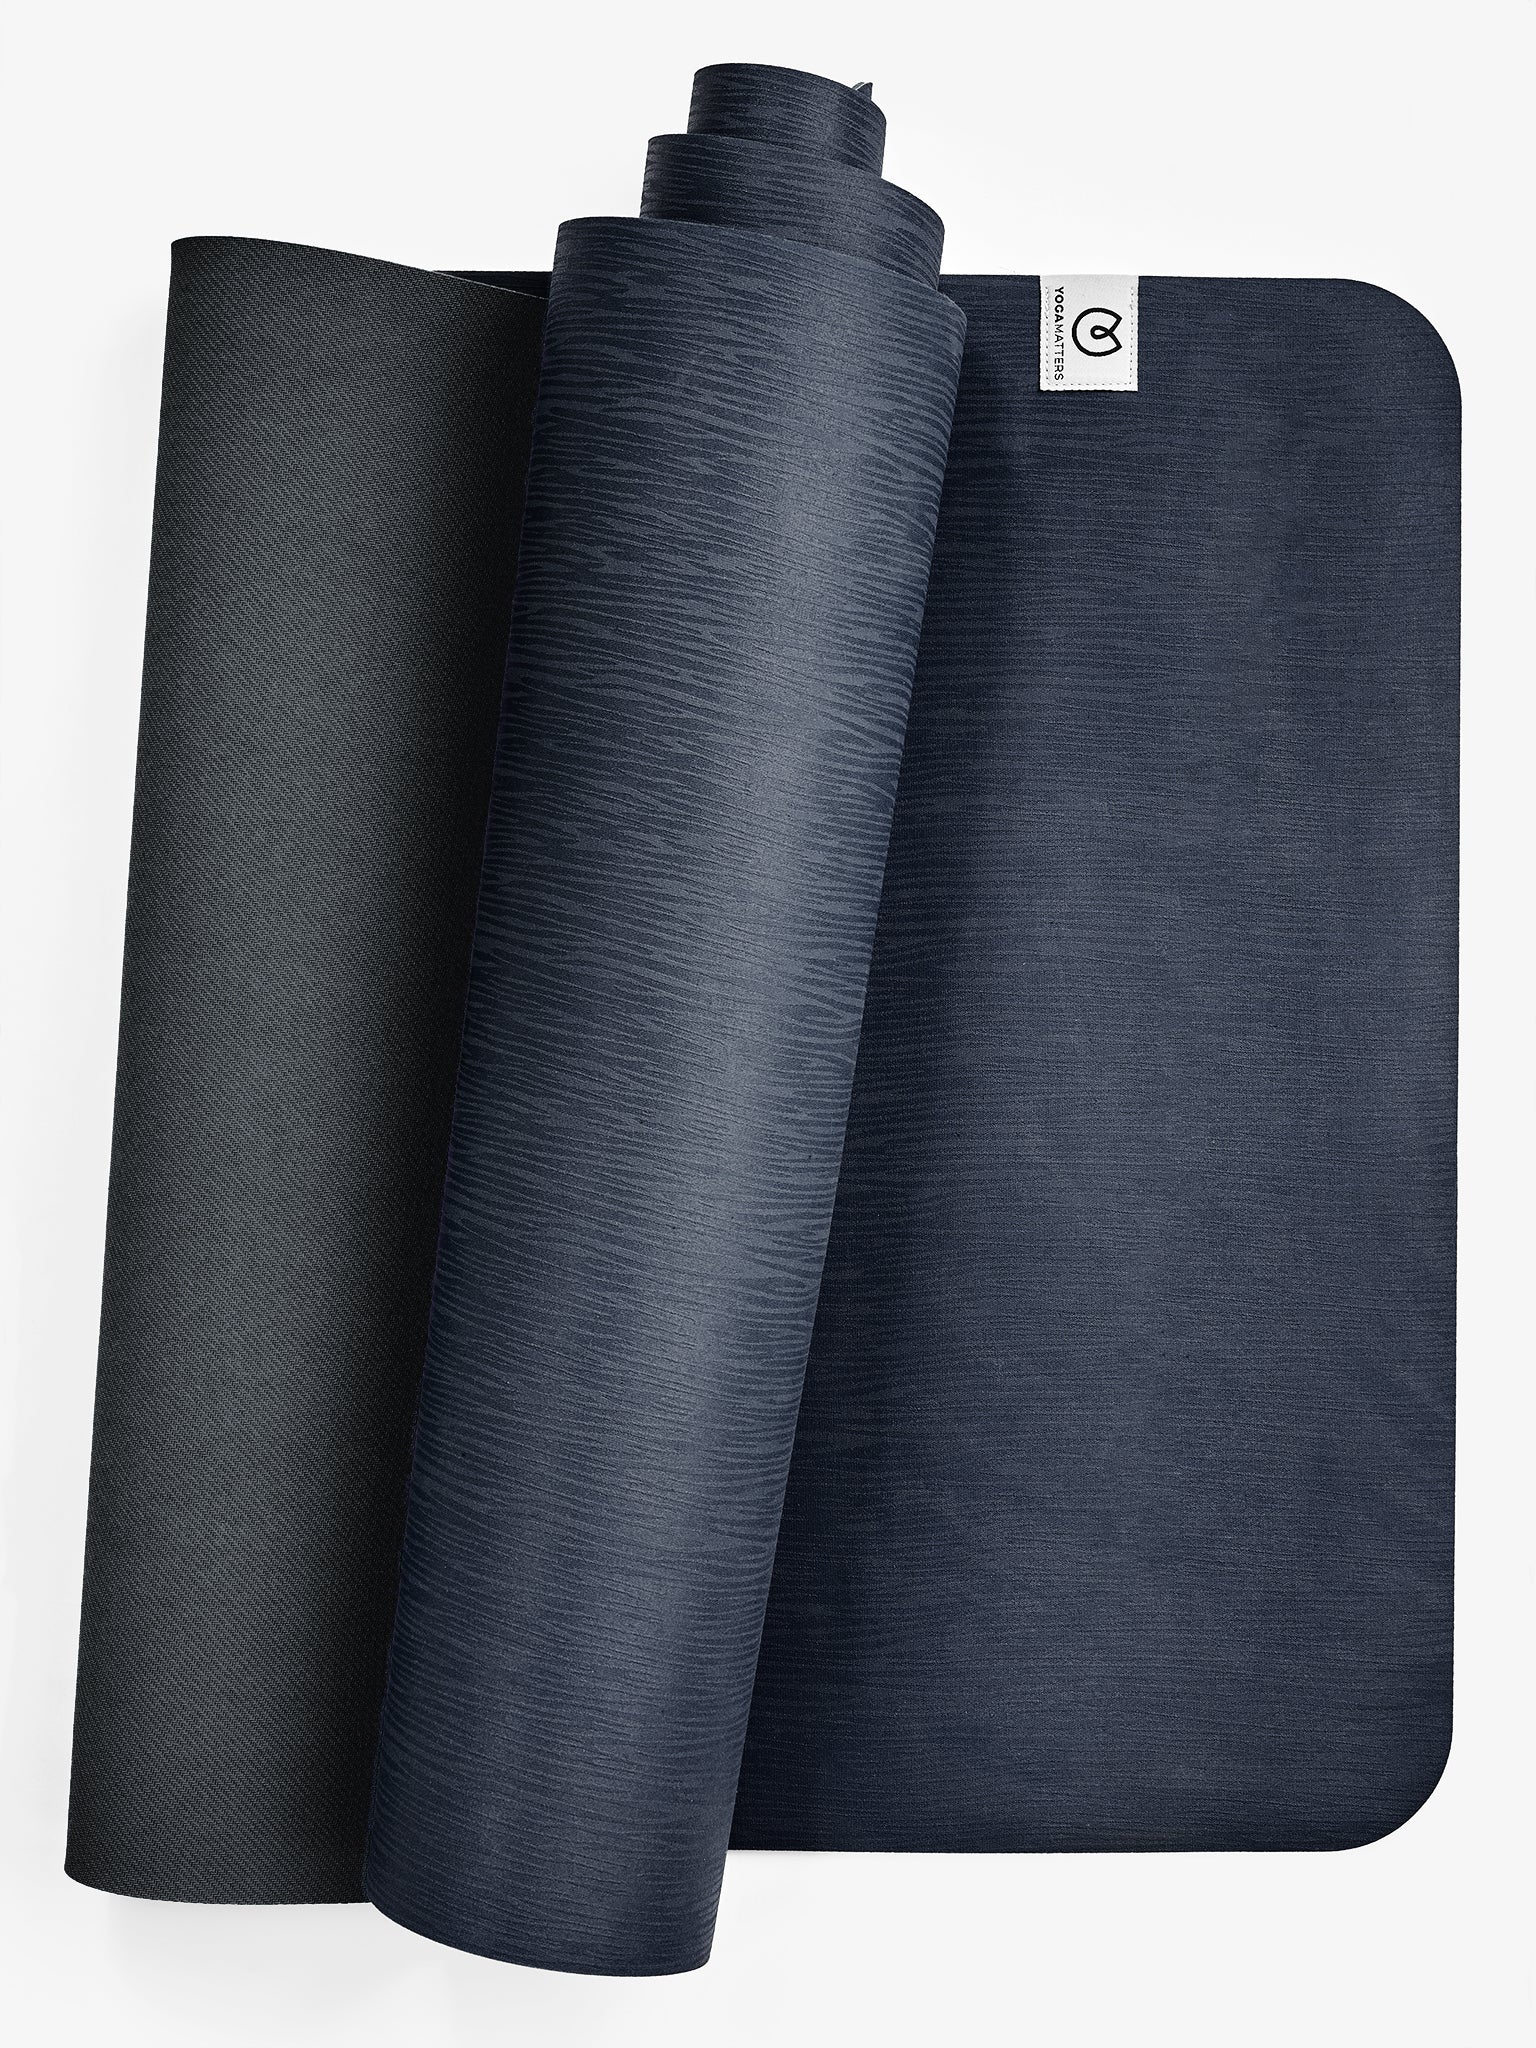 Navy blue textured yoga mat rolled and unrolled front view with visible brand logo for yoga and fitness enthusiasts